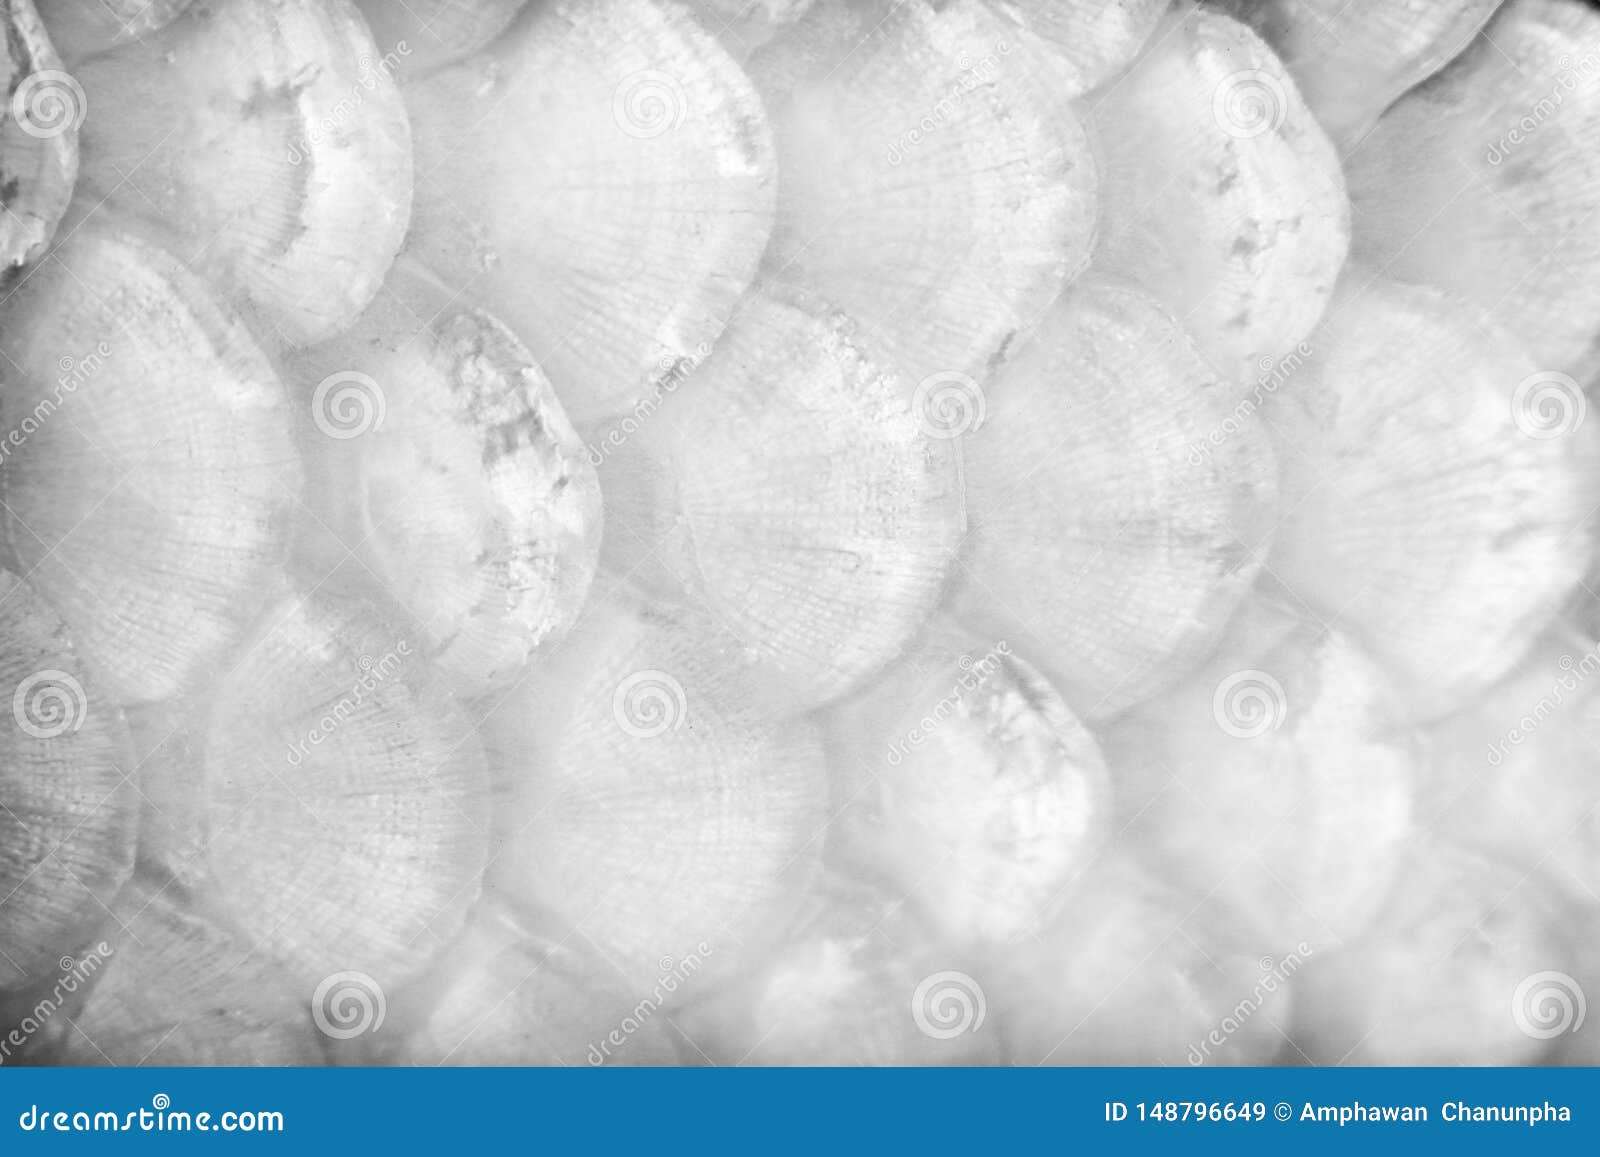 White or Gray Carp Texture or Koi Fish Scales Patterns Nature Background  Stock Image - Image of overlap, oriental: 148796649